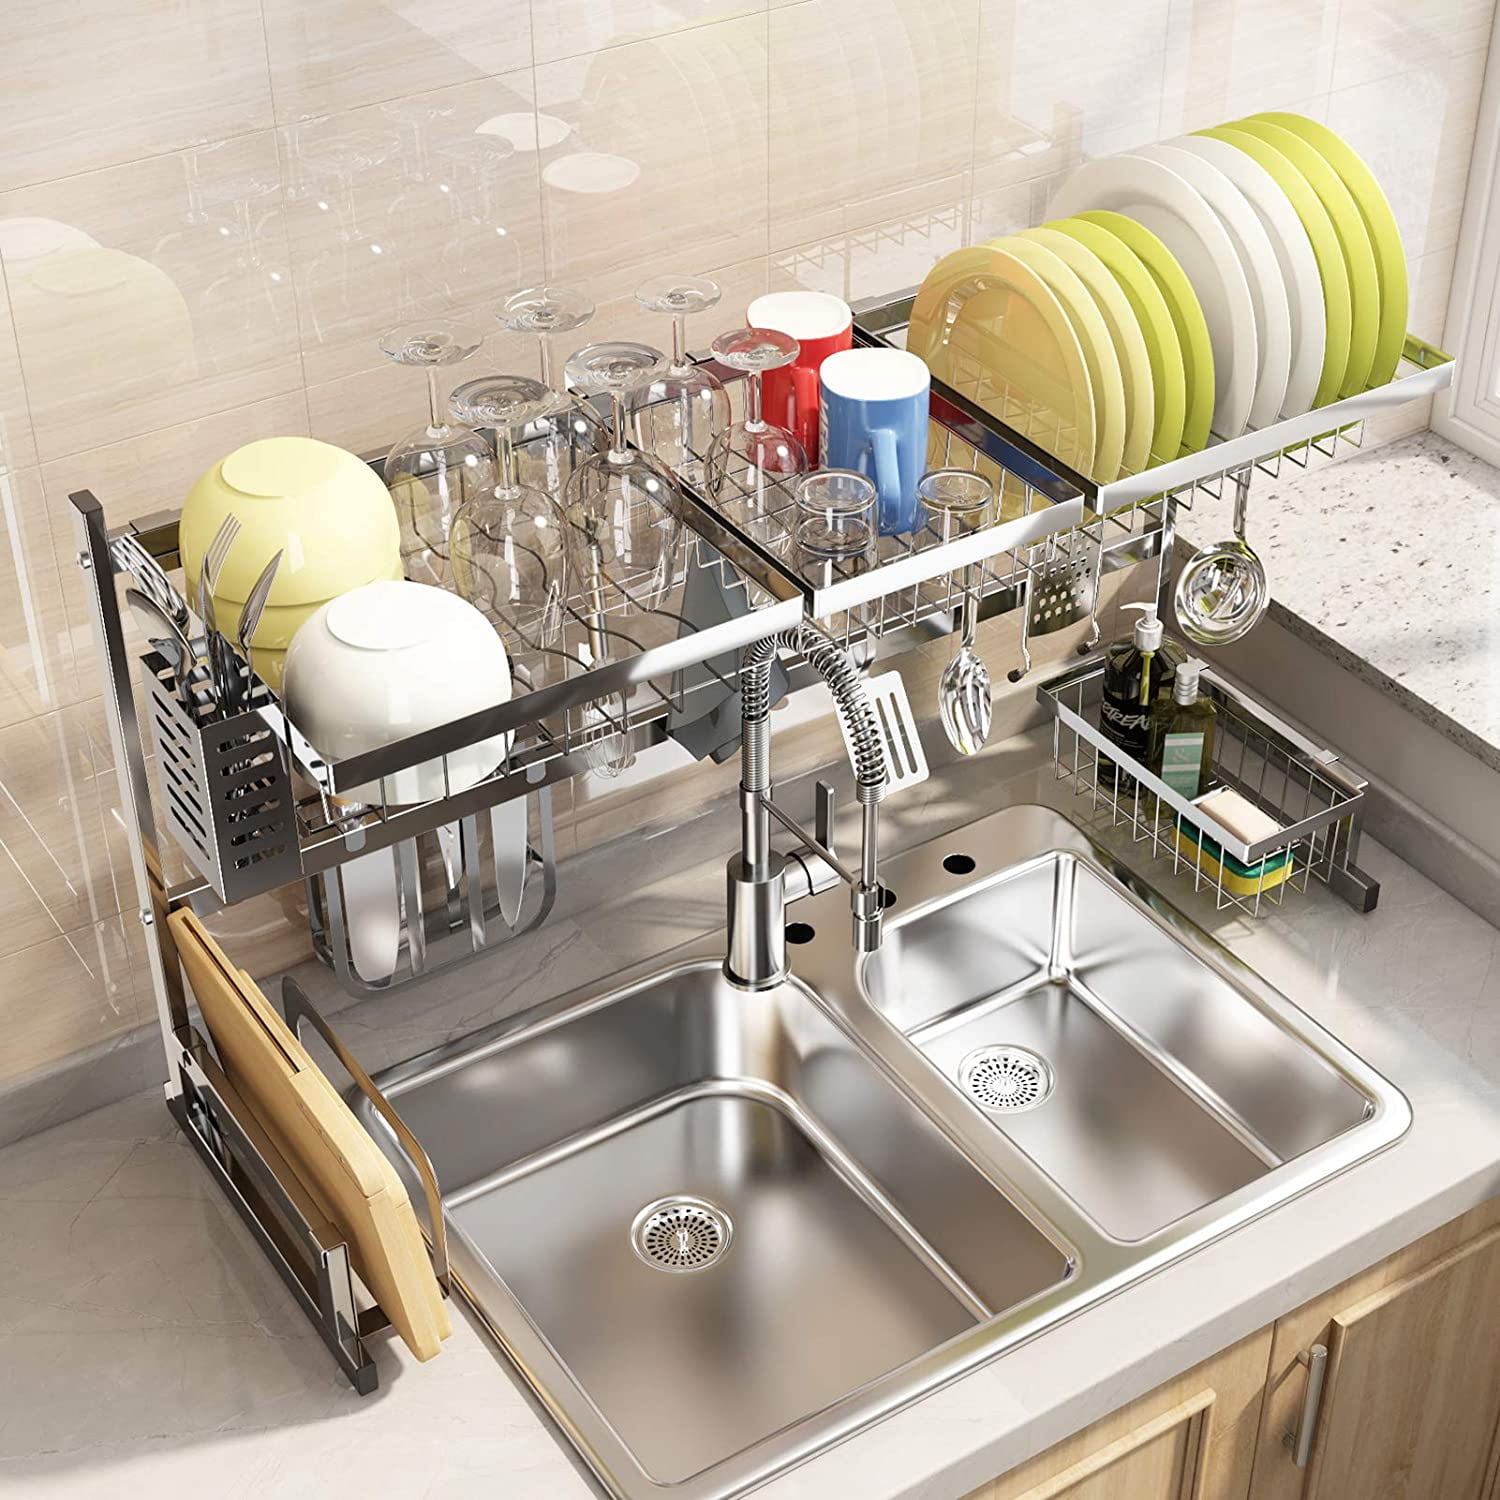 37in. Stainless Steel Dish Drying Rack Over Kitchen Sink, Dishes and Utensils  Drying Shelf, Kitchen Storage Countertop Organizer - On Sale - Bed Bath &  Beyond - 29718684